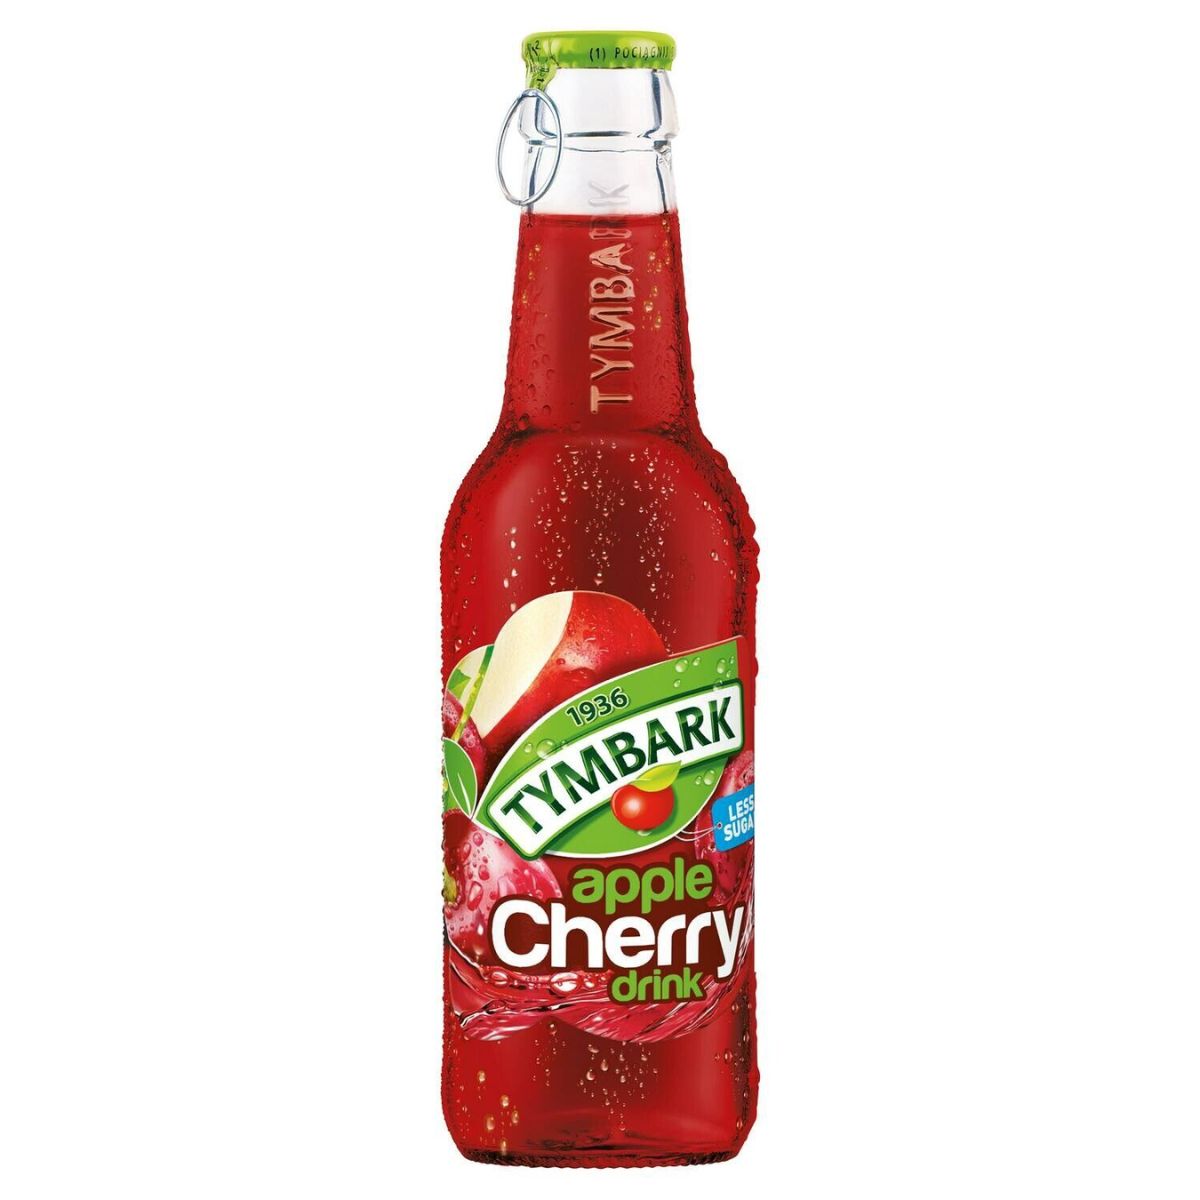 A bottle of Tymbark - Apple Cherry - 250ml soda on a white background.